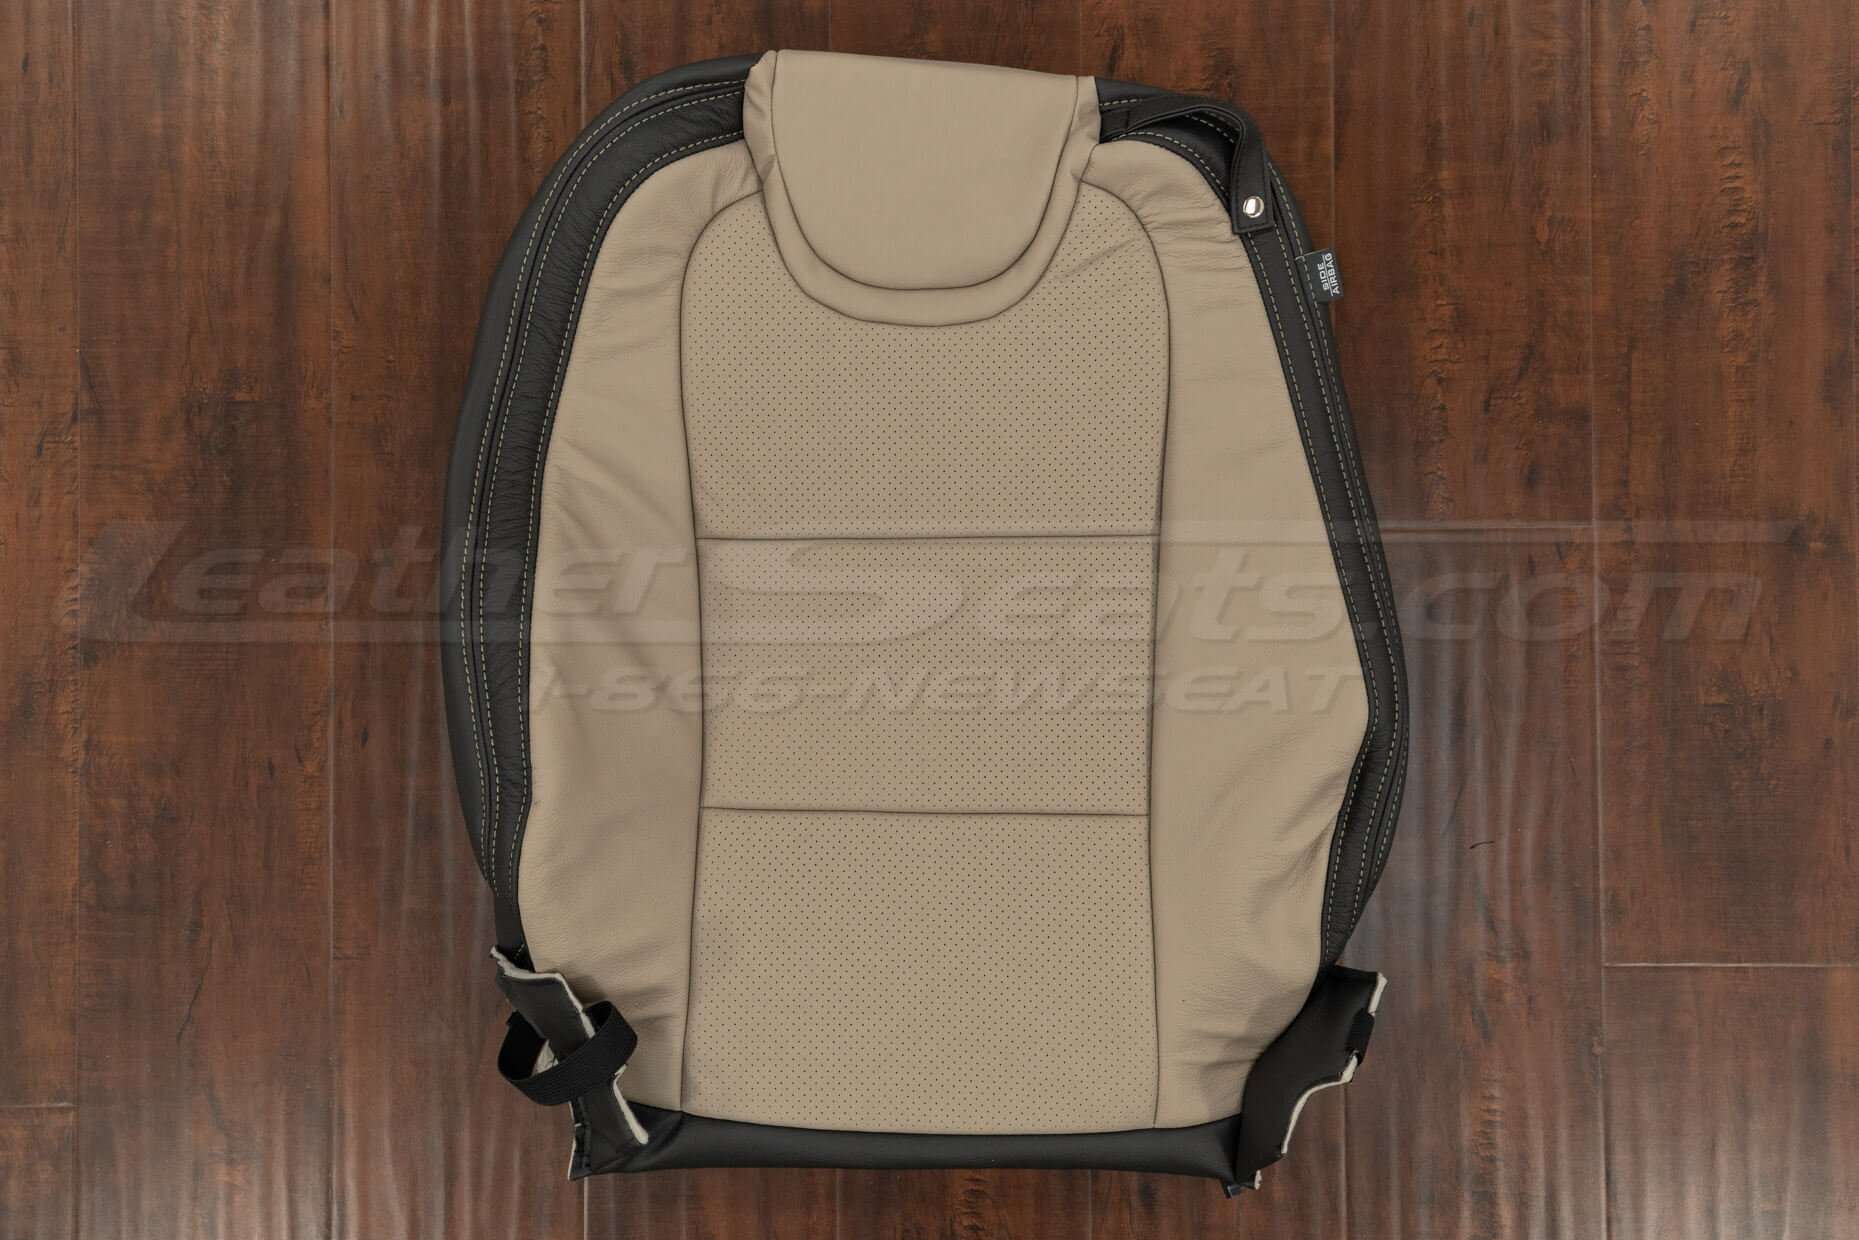 Chevrolet Camaro front perforated backrest upholstery